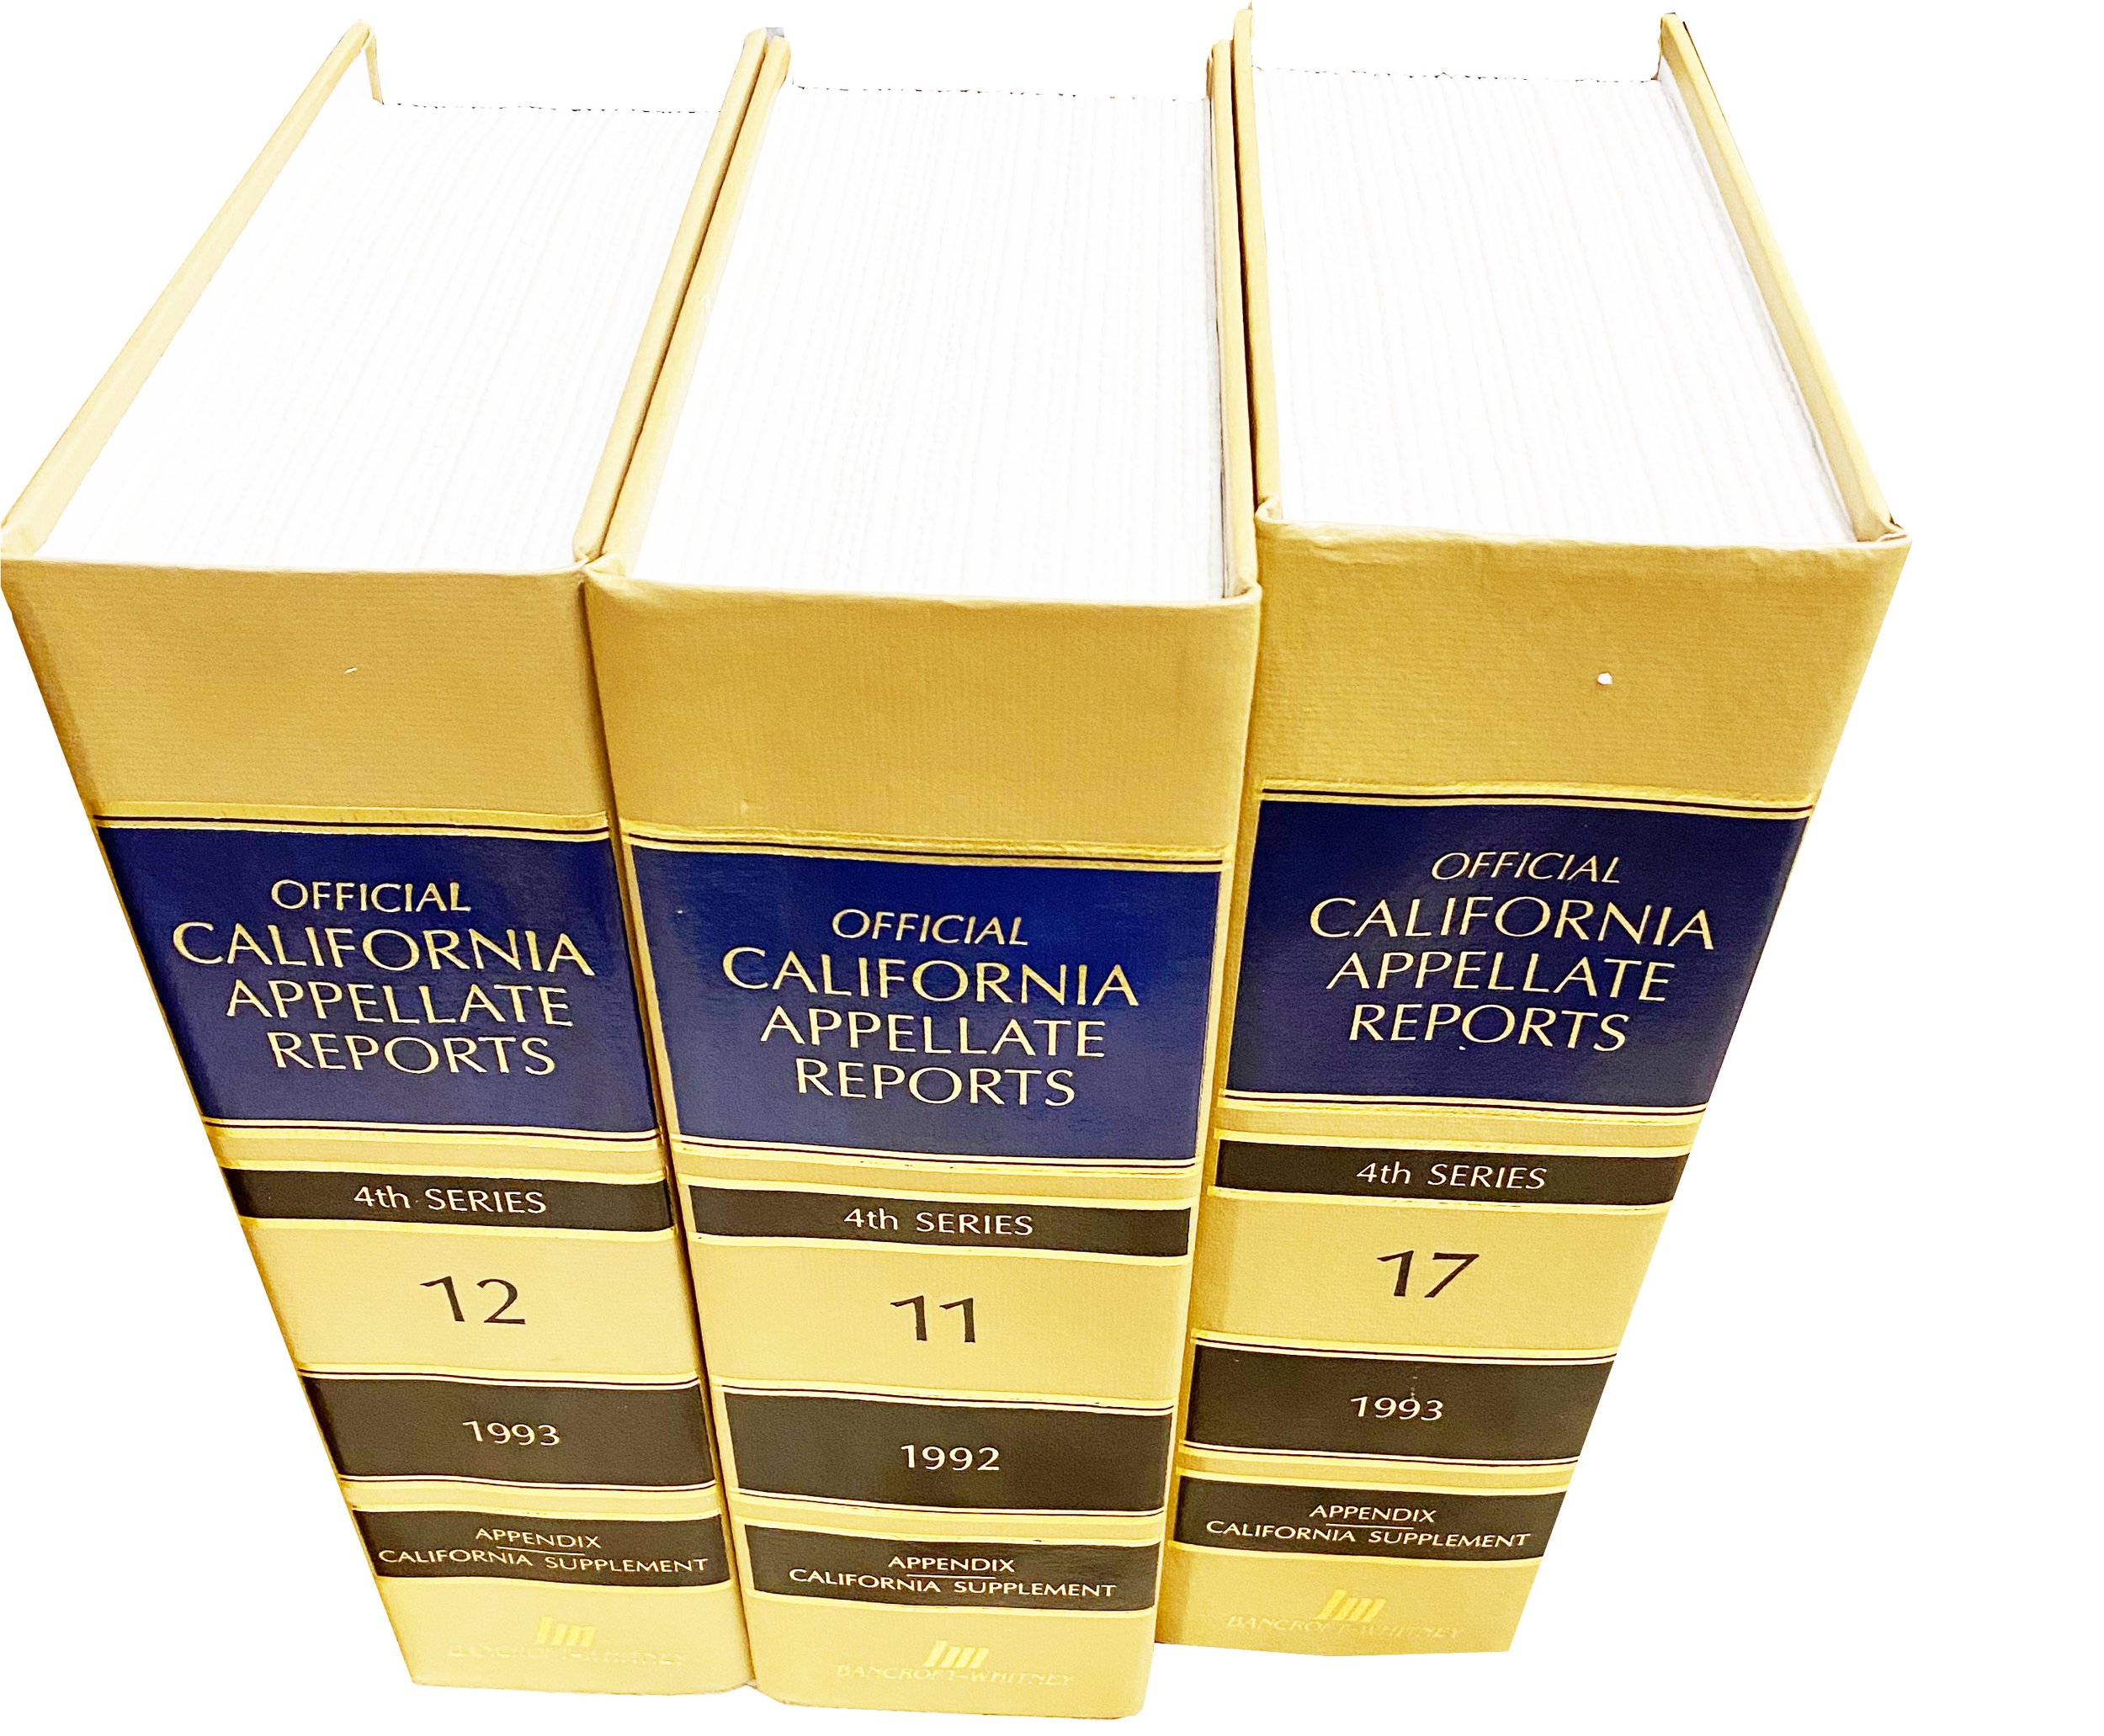 Official California Appellate Reports (4th Series)